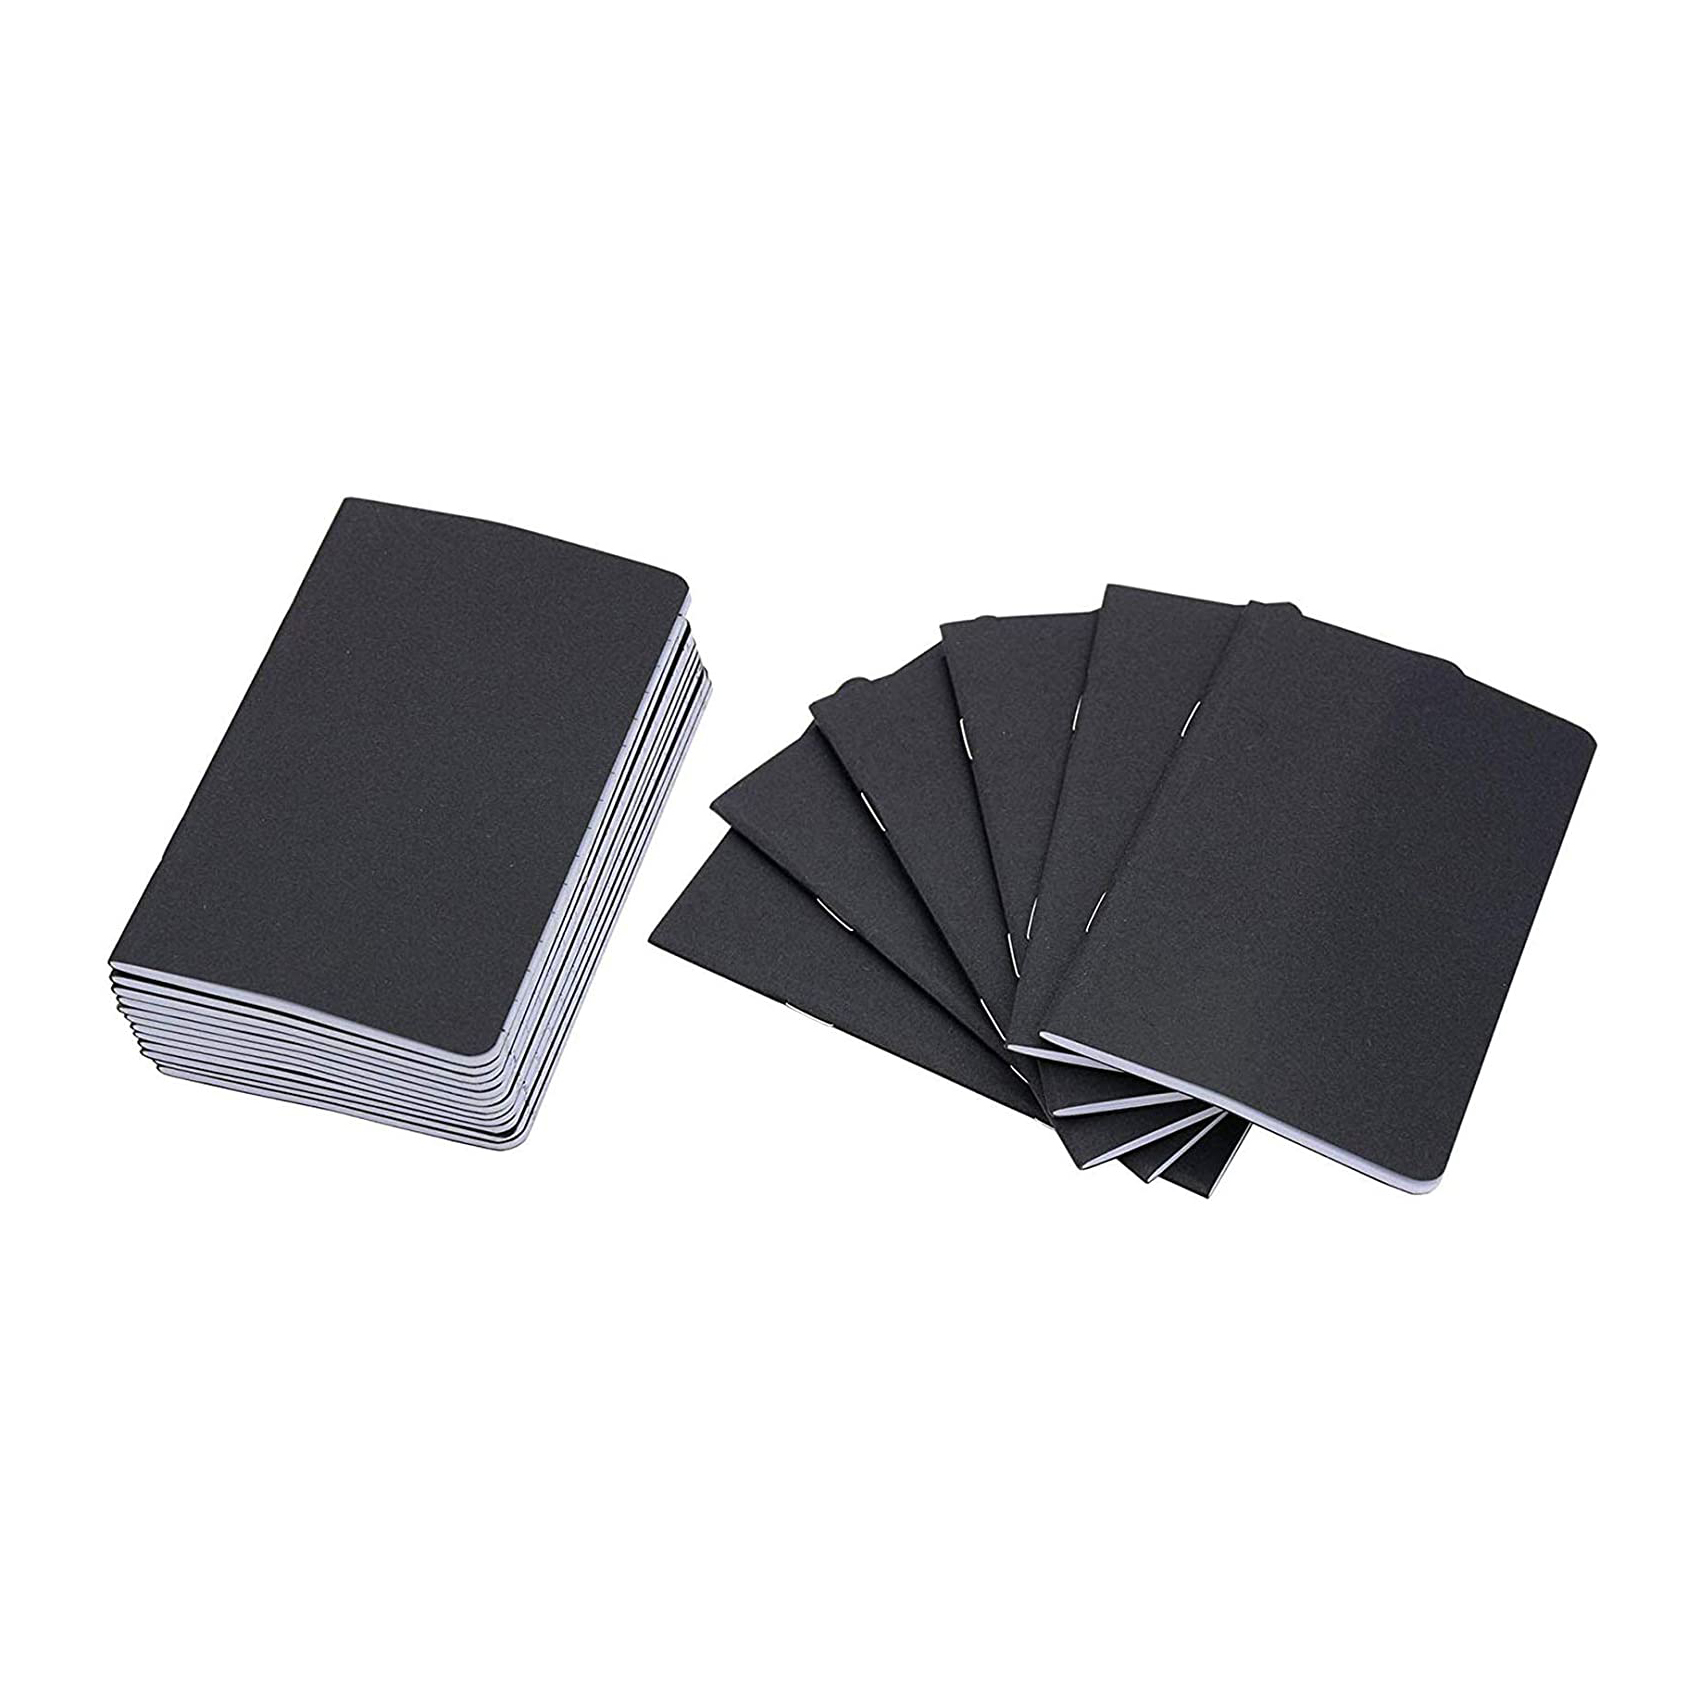 5.5 Inch X 3.5 Inch 32 Sheets Small Pocket Black Cover Pocket Notebook